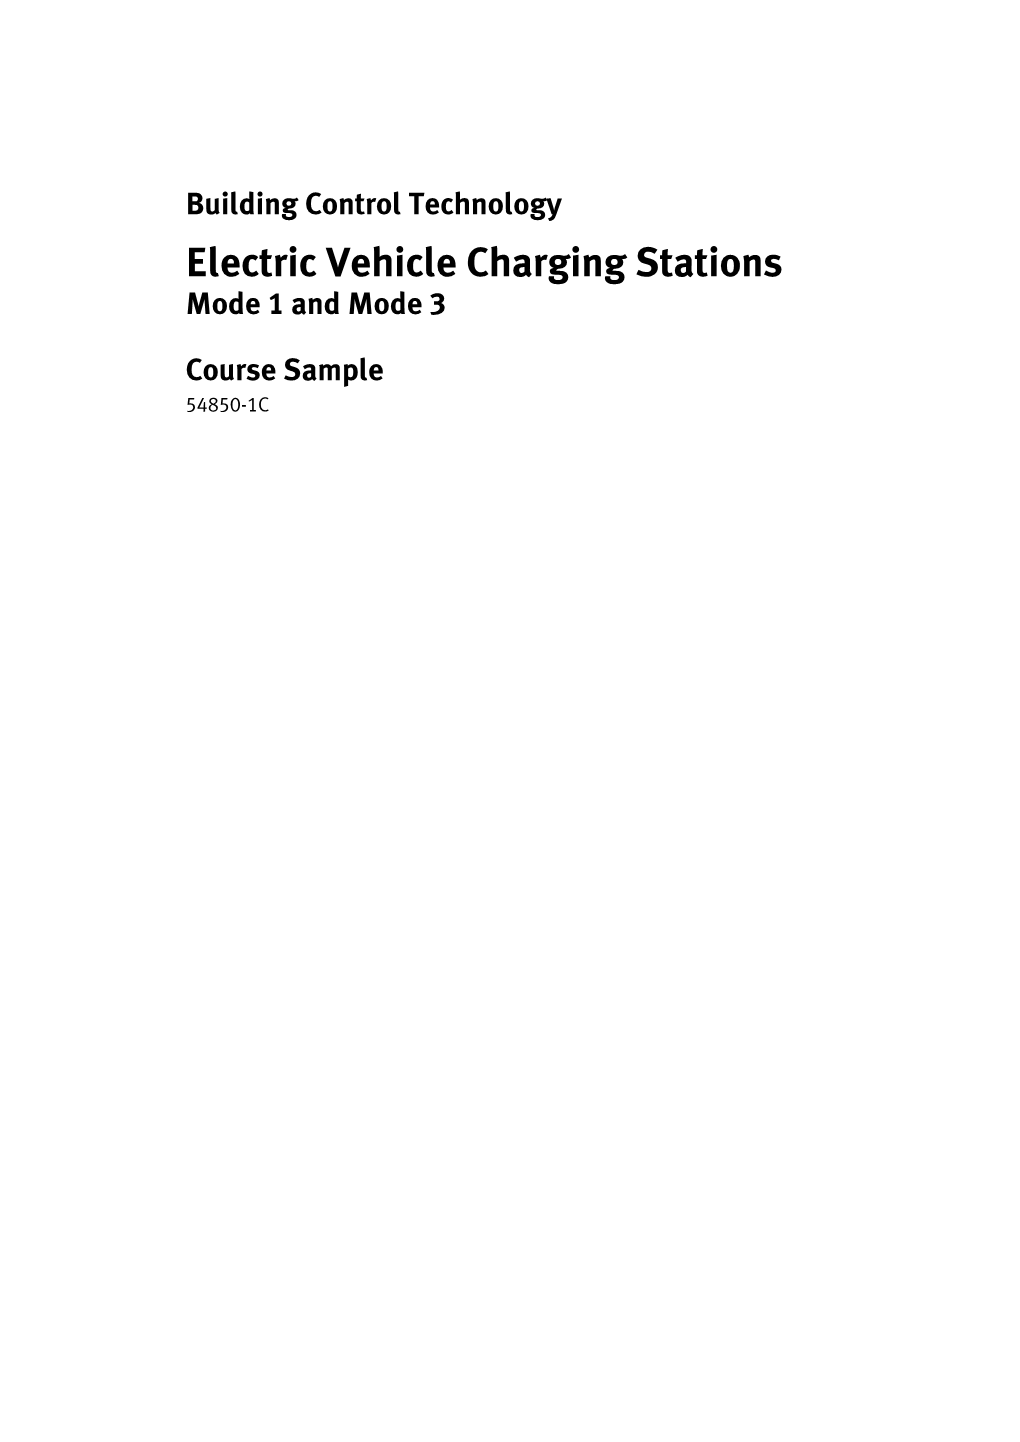 Electric Vehicle Charging Stations Mode 1 and Mode 3